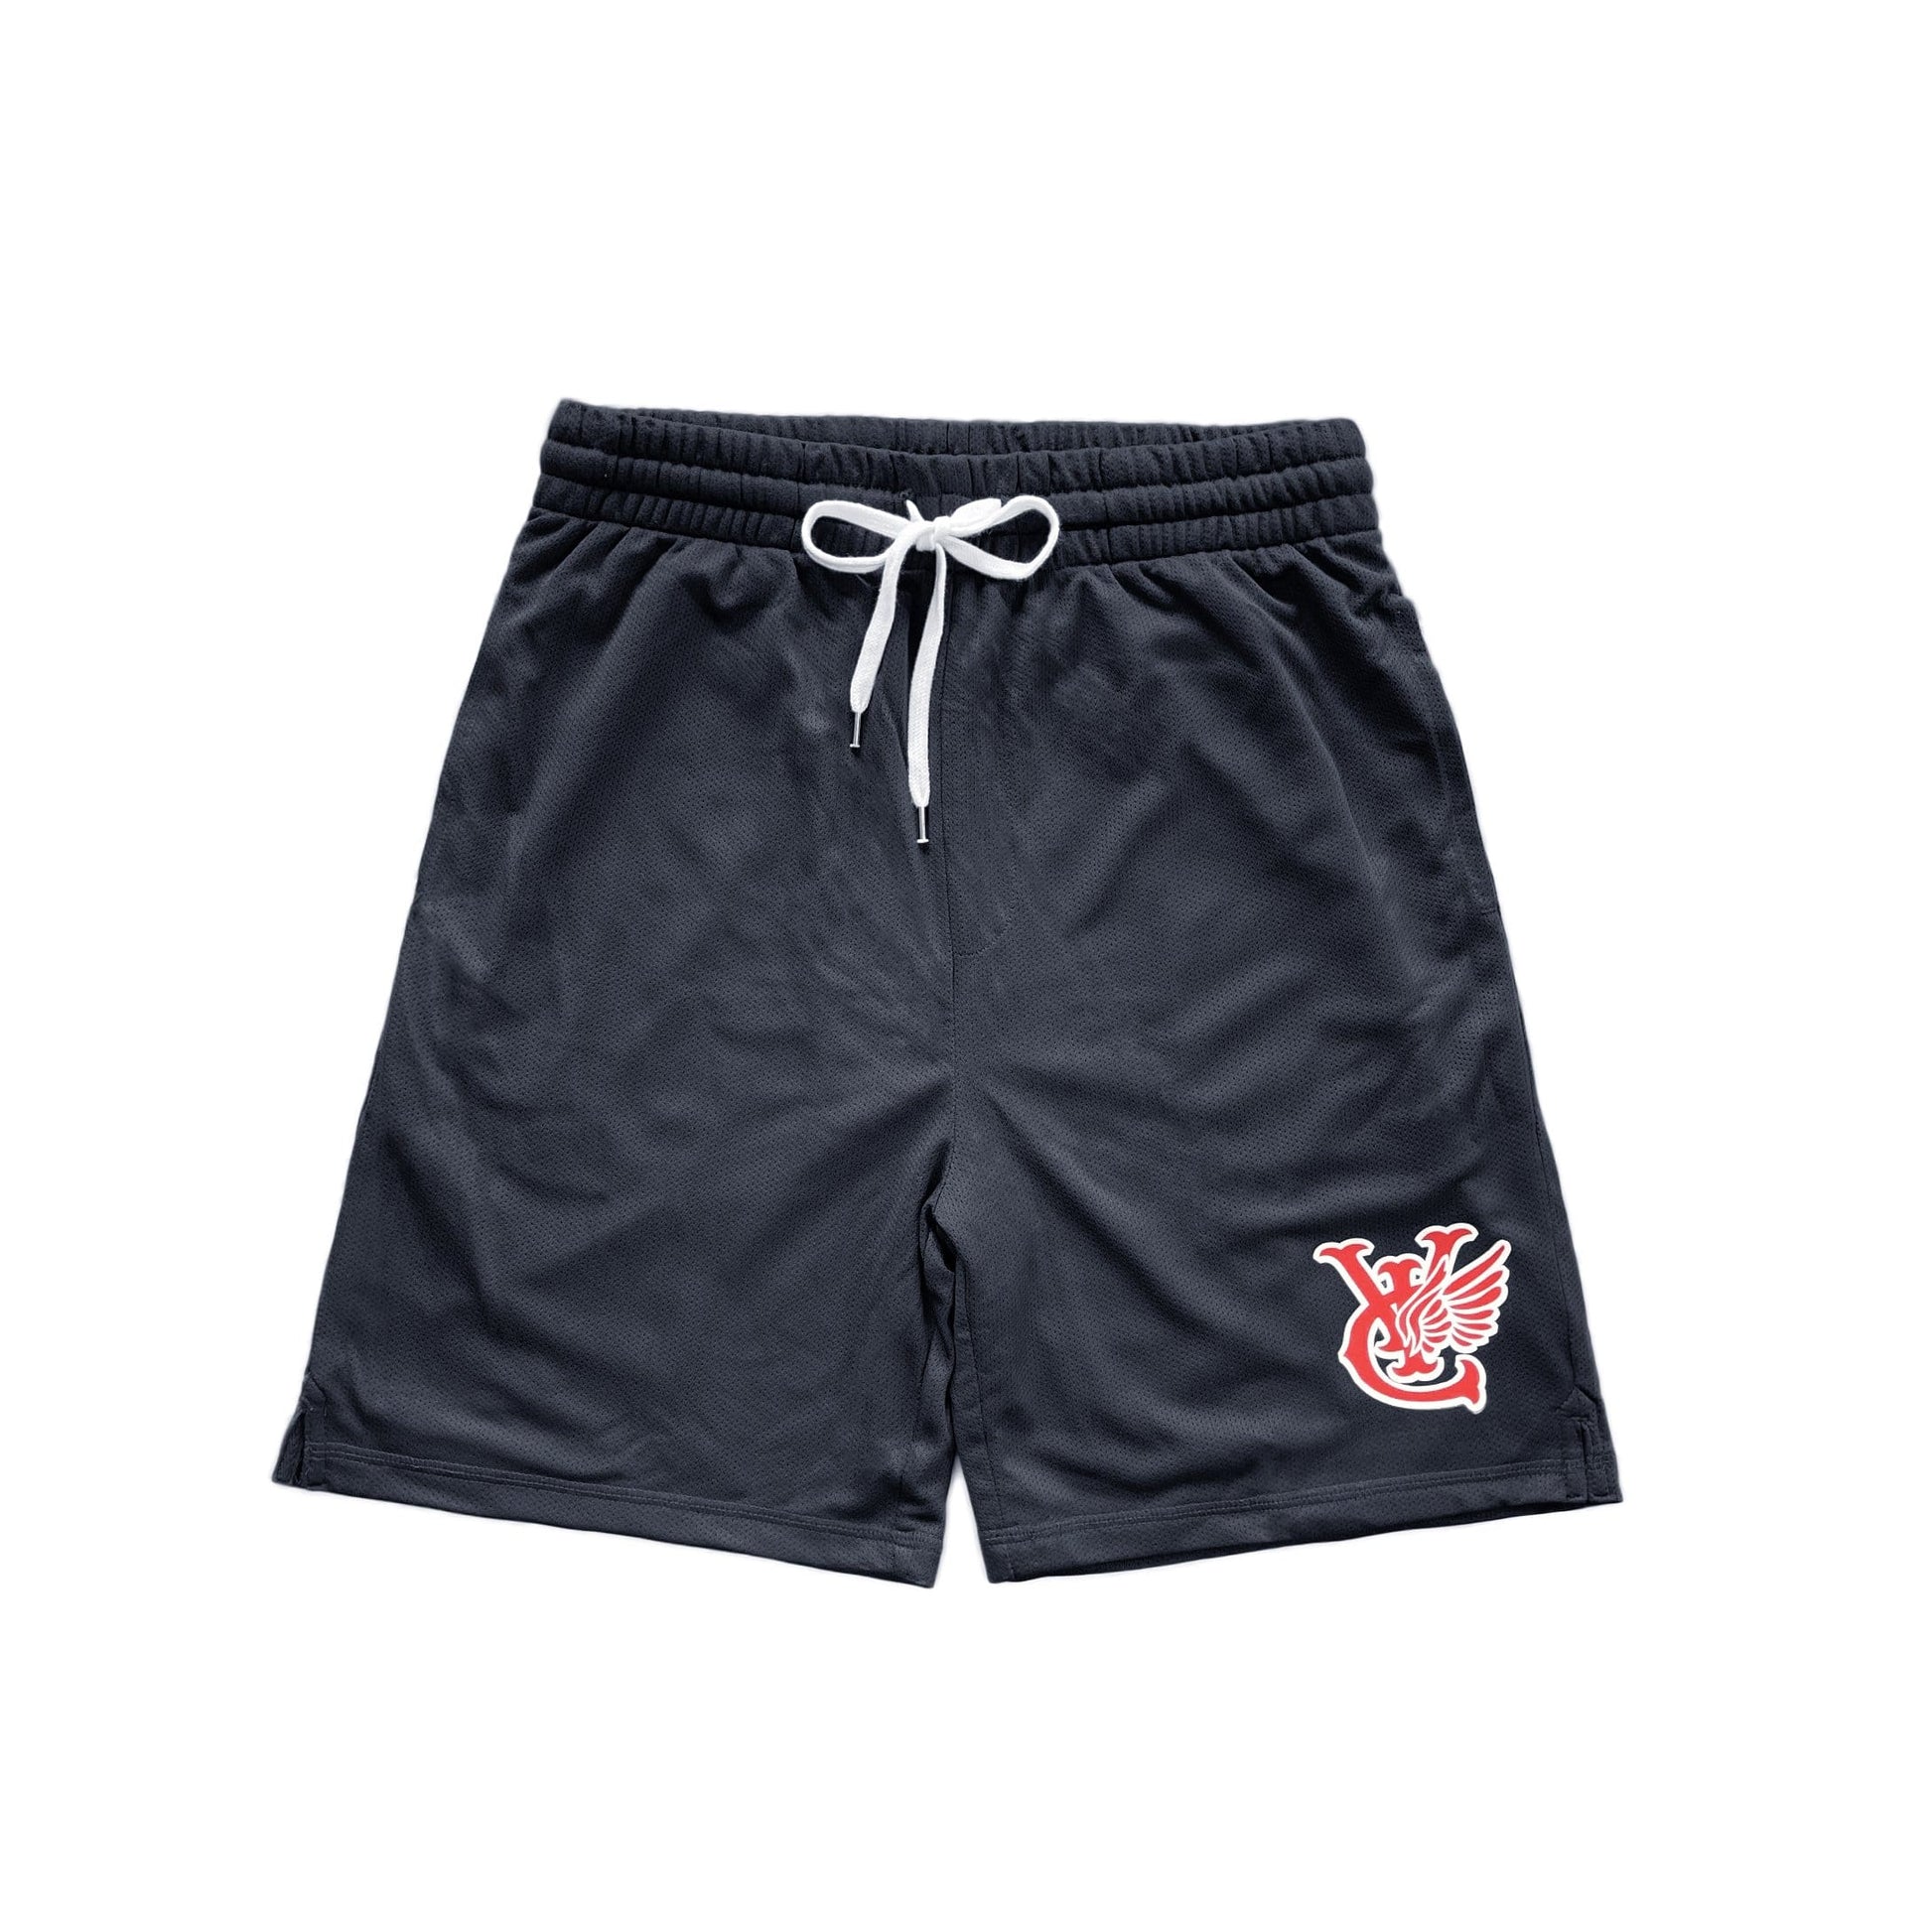 Retro style basketball shorts by New Zealand skate and streetwear clothing label VIC Apparel. American vintage classic sportswear. Full athletic fit. Minimal simple design.